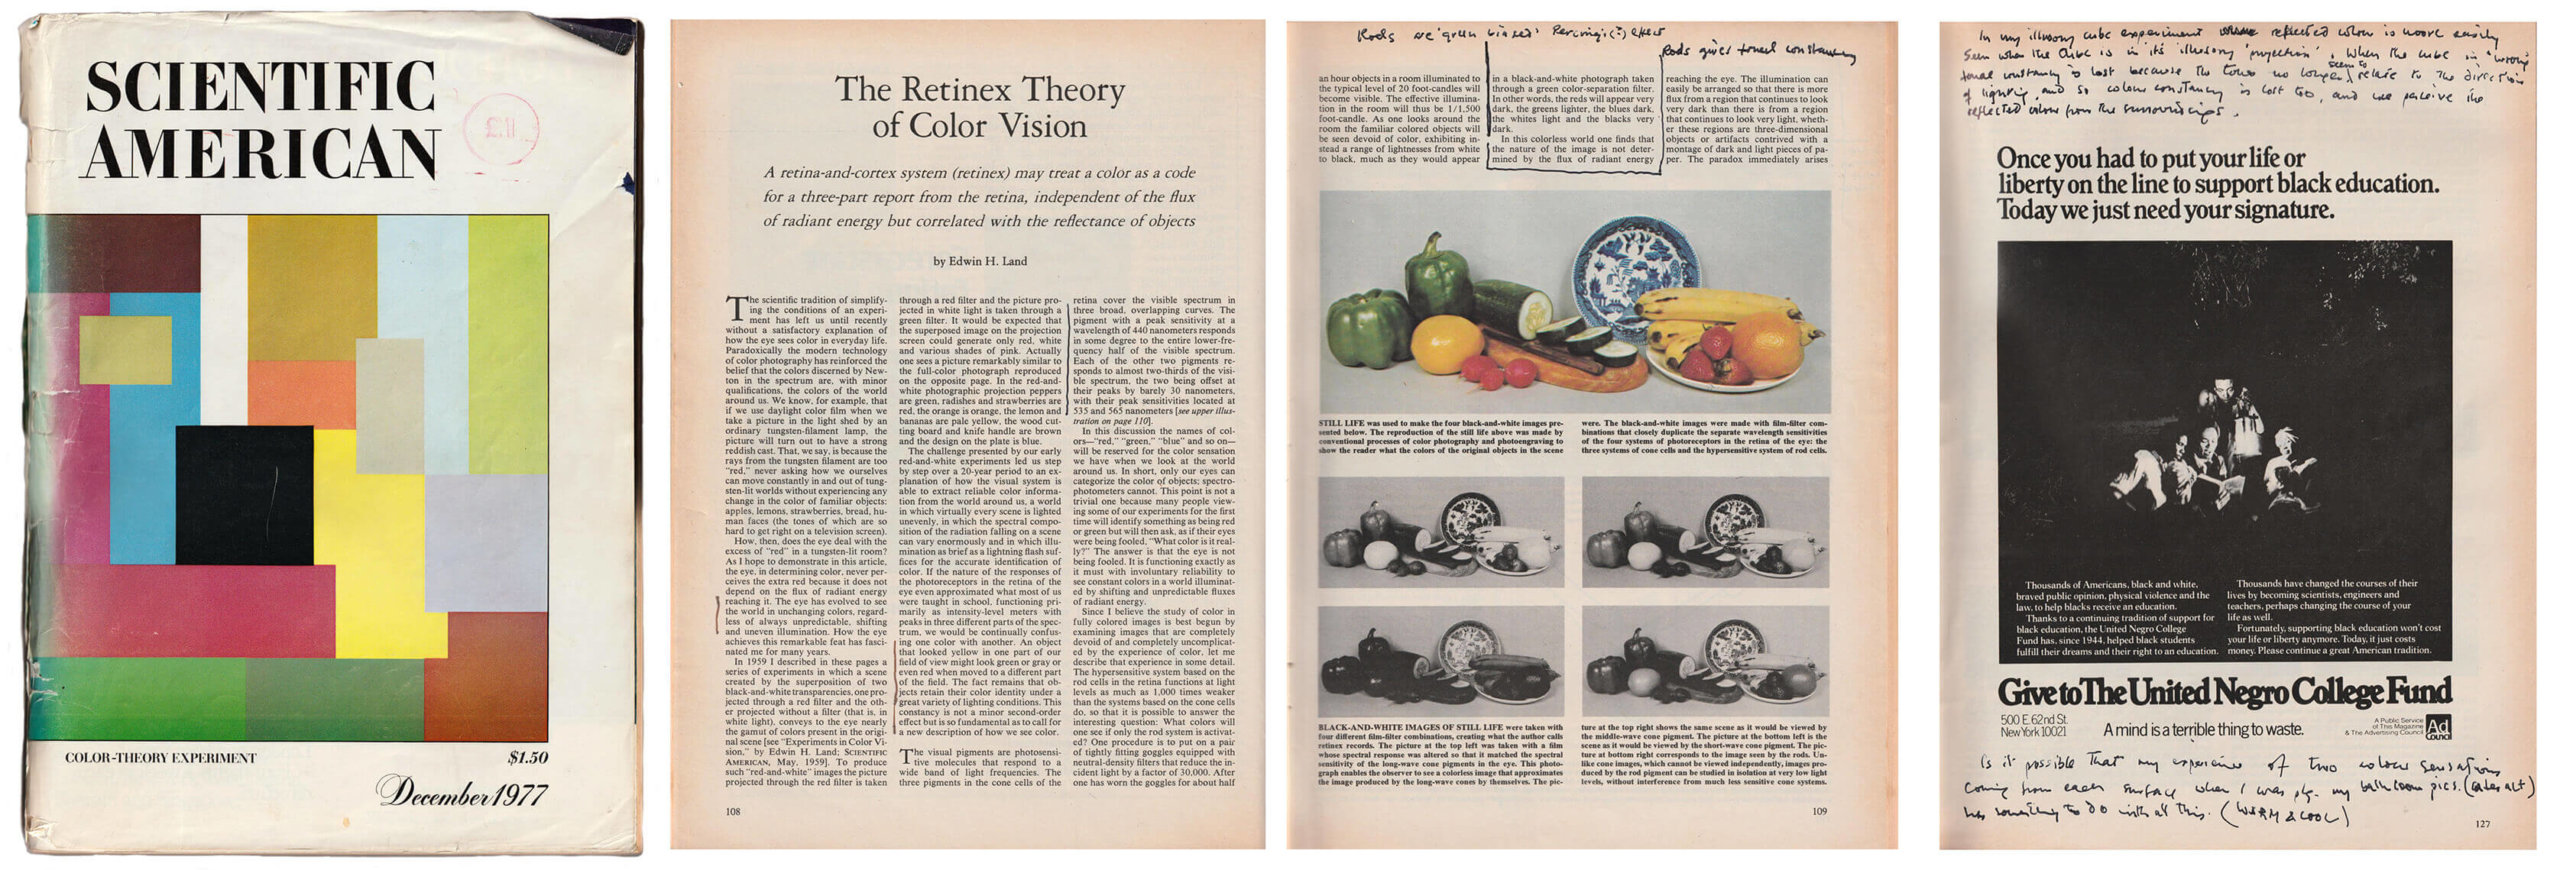 Edwin Land’s “Retinex Theory” in Scientific American with notes by Sargy Mann (Sargy Mann estate)